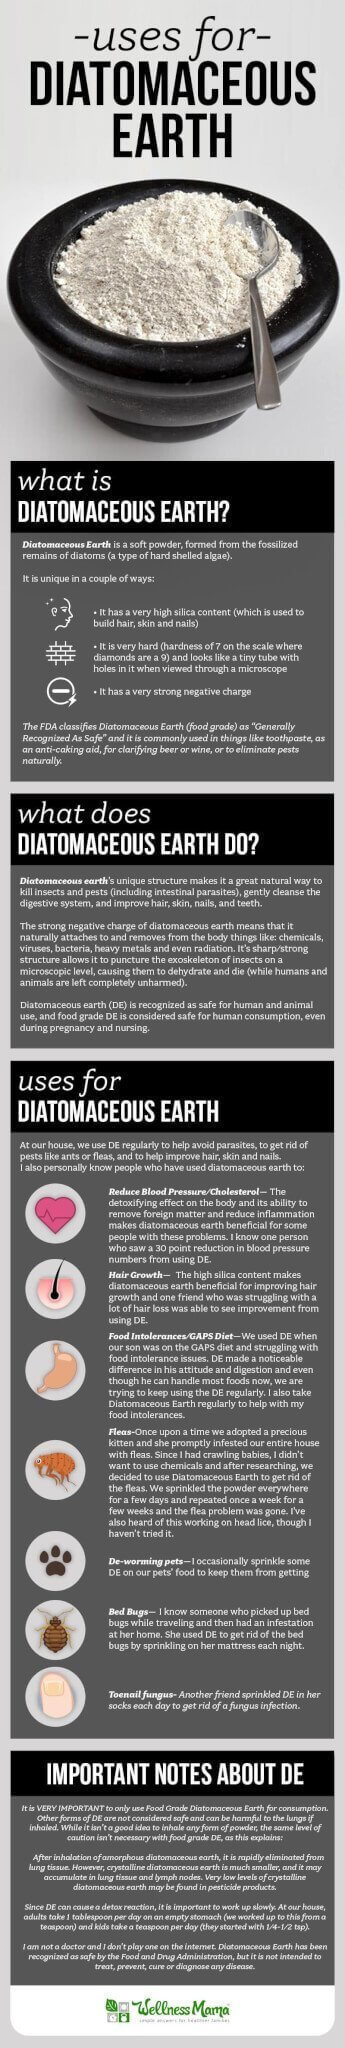 Diatomaceous earth is a chalky powder of fossilized diatoms. It is helpful for eliminating bed bugs, fleas and other pests and is a powerful beauty remedy.